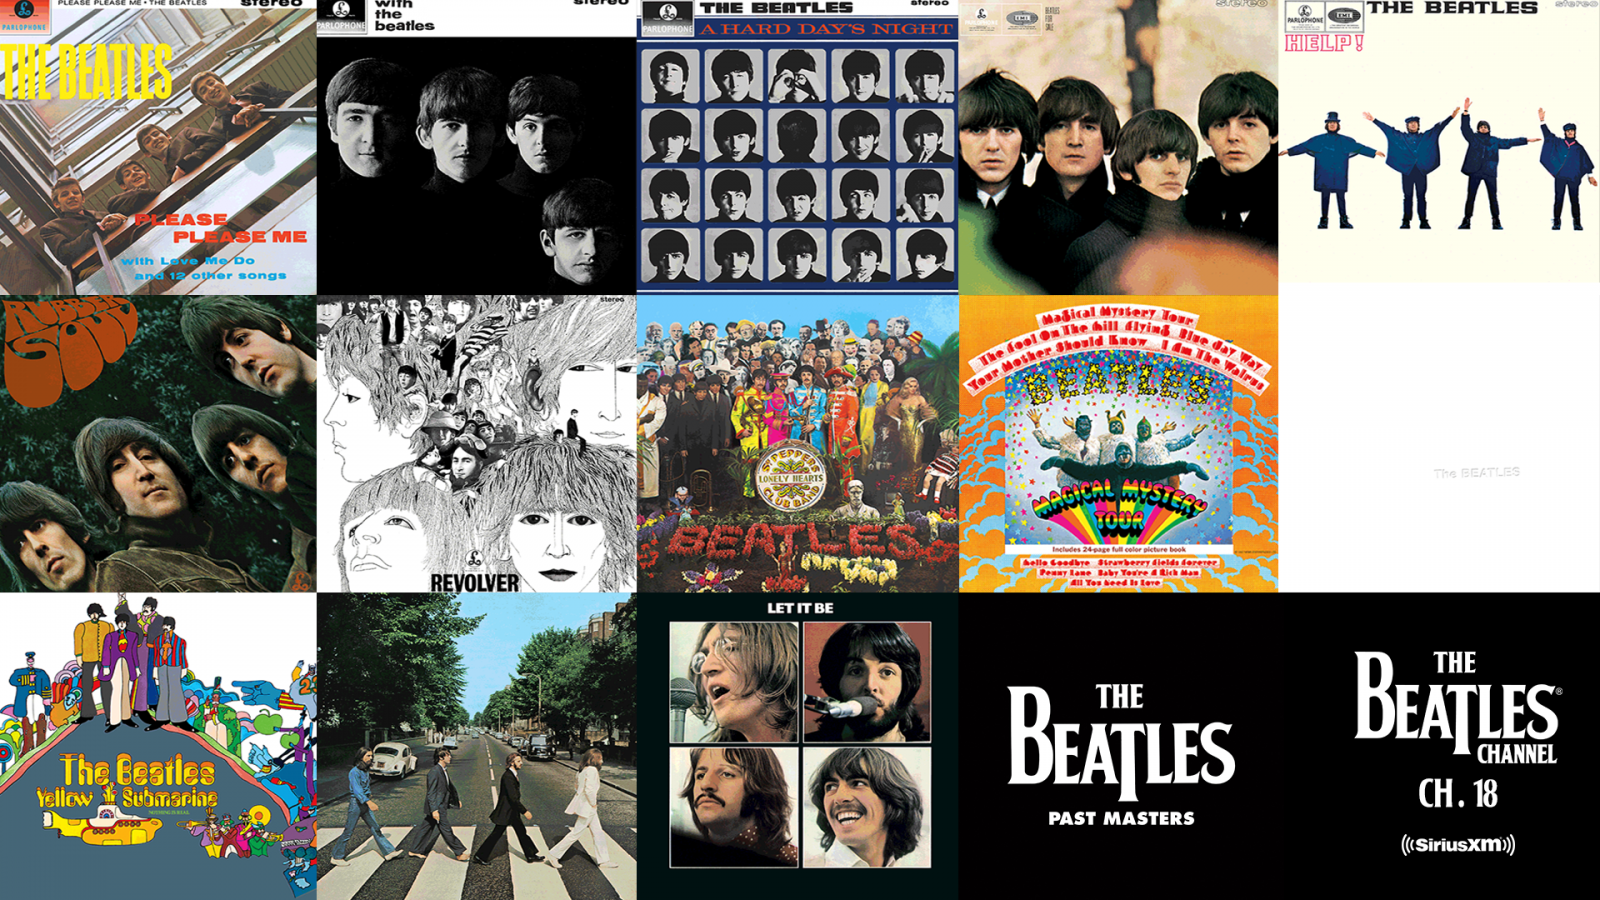 The Beatles Channel. All Beatles albums